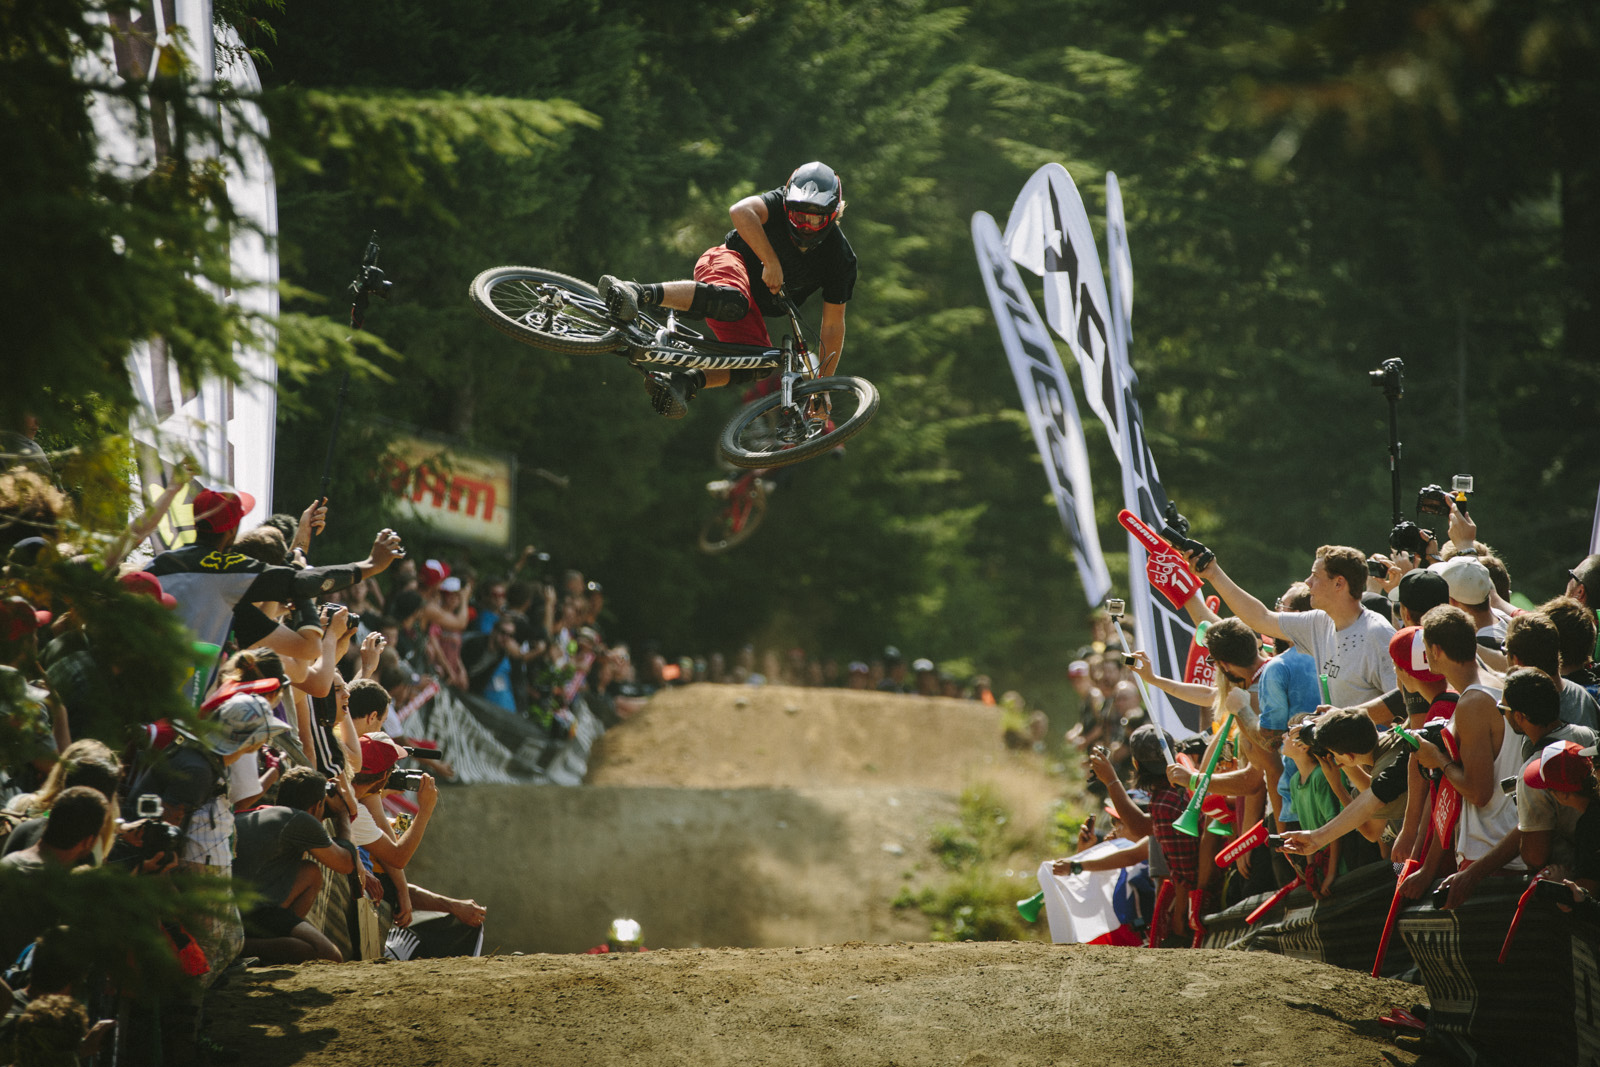 Matty Miles at the Official Whip off Worlds, Crankworx 2014, Whistler, British Columbia, Canada